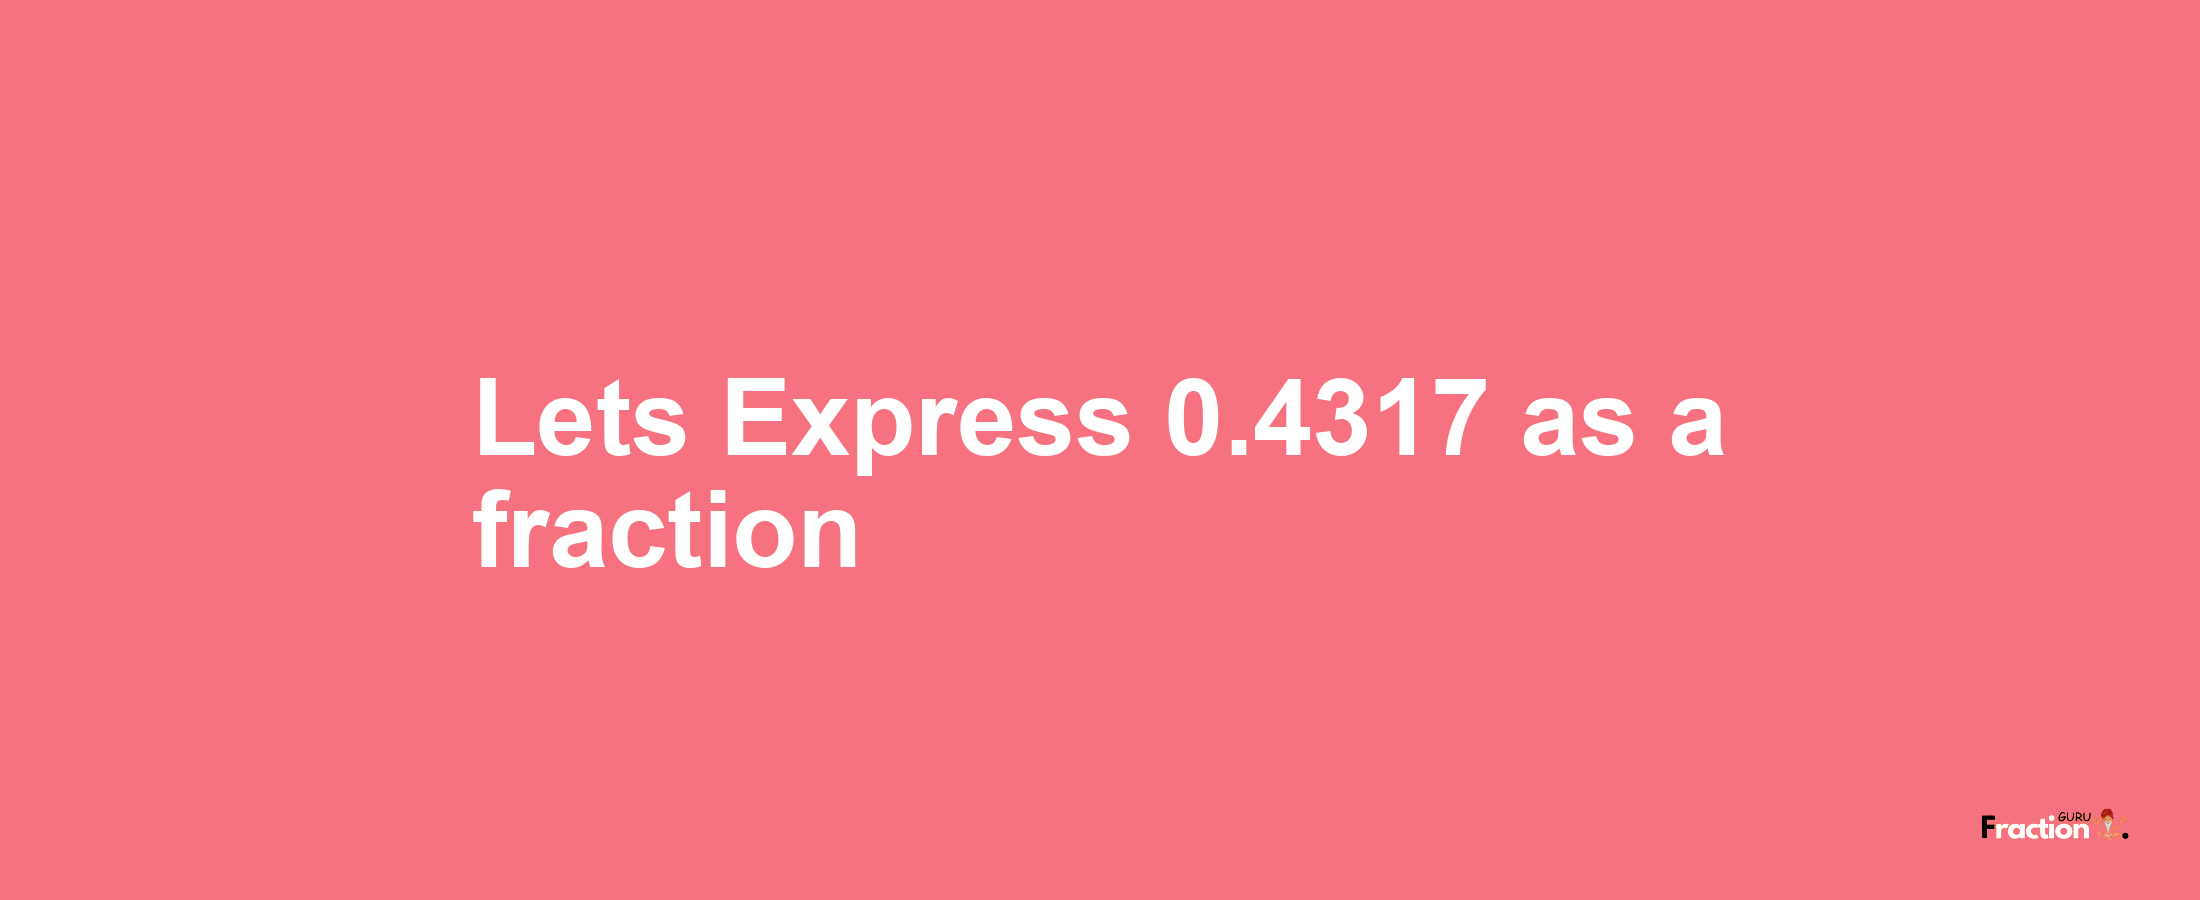 Lets Express 0.4317 as afraction